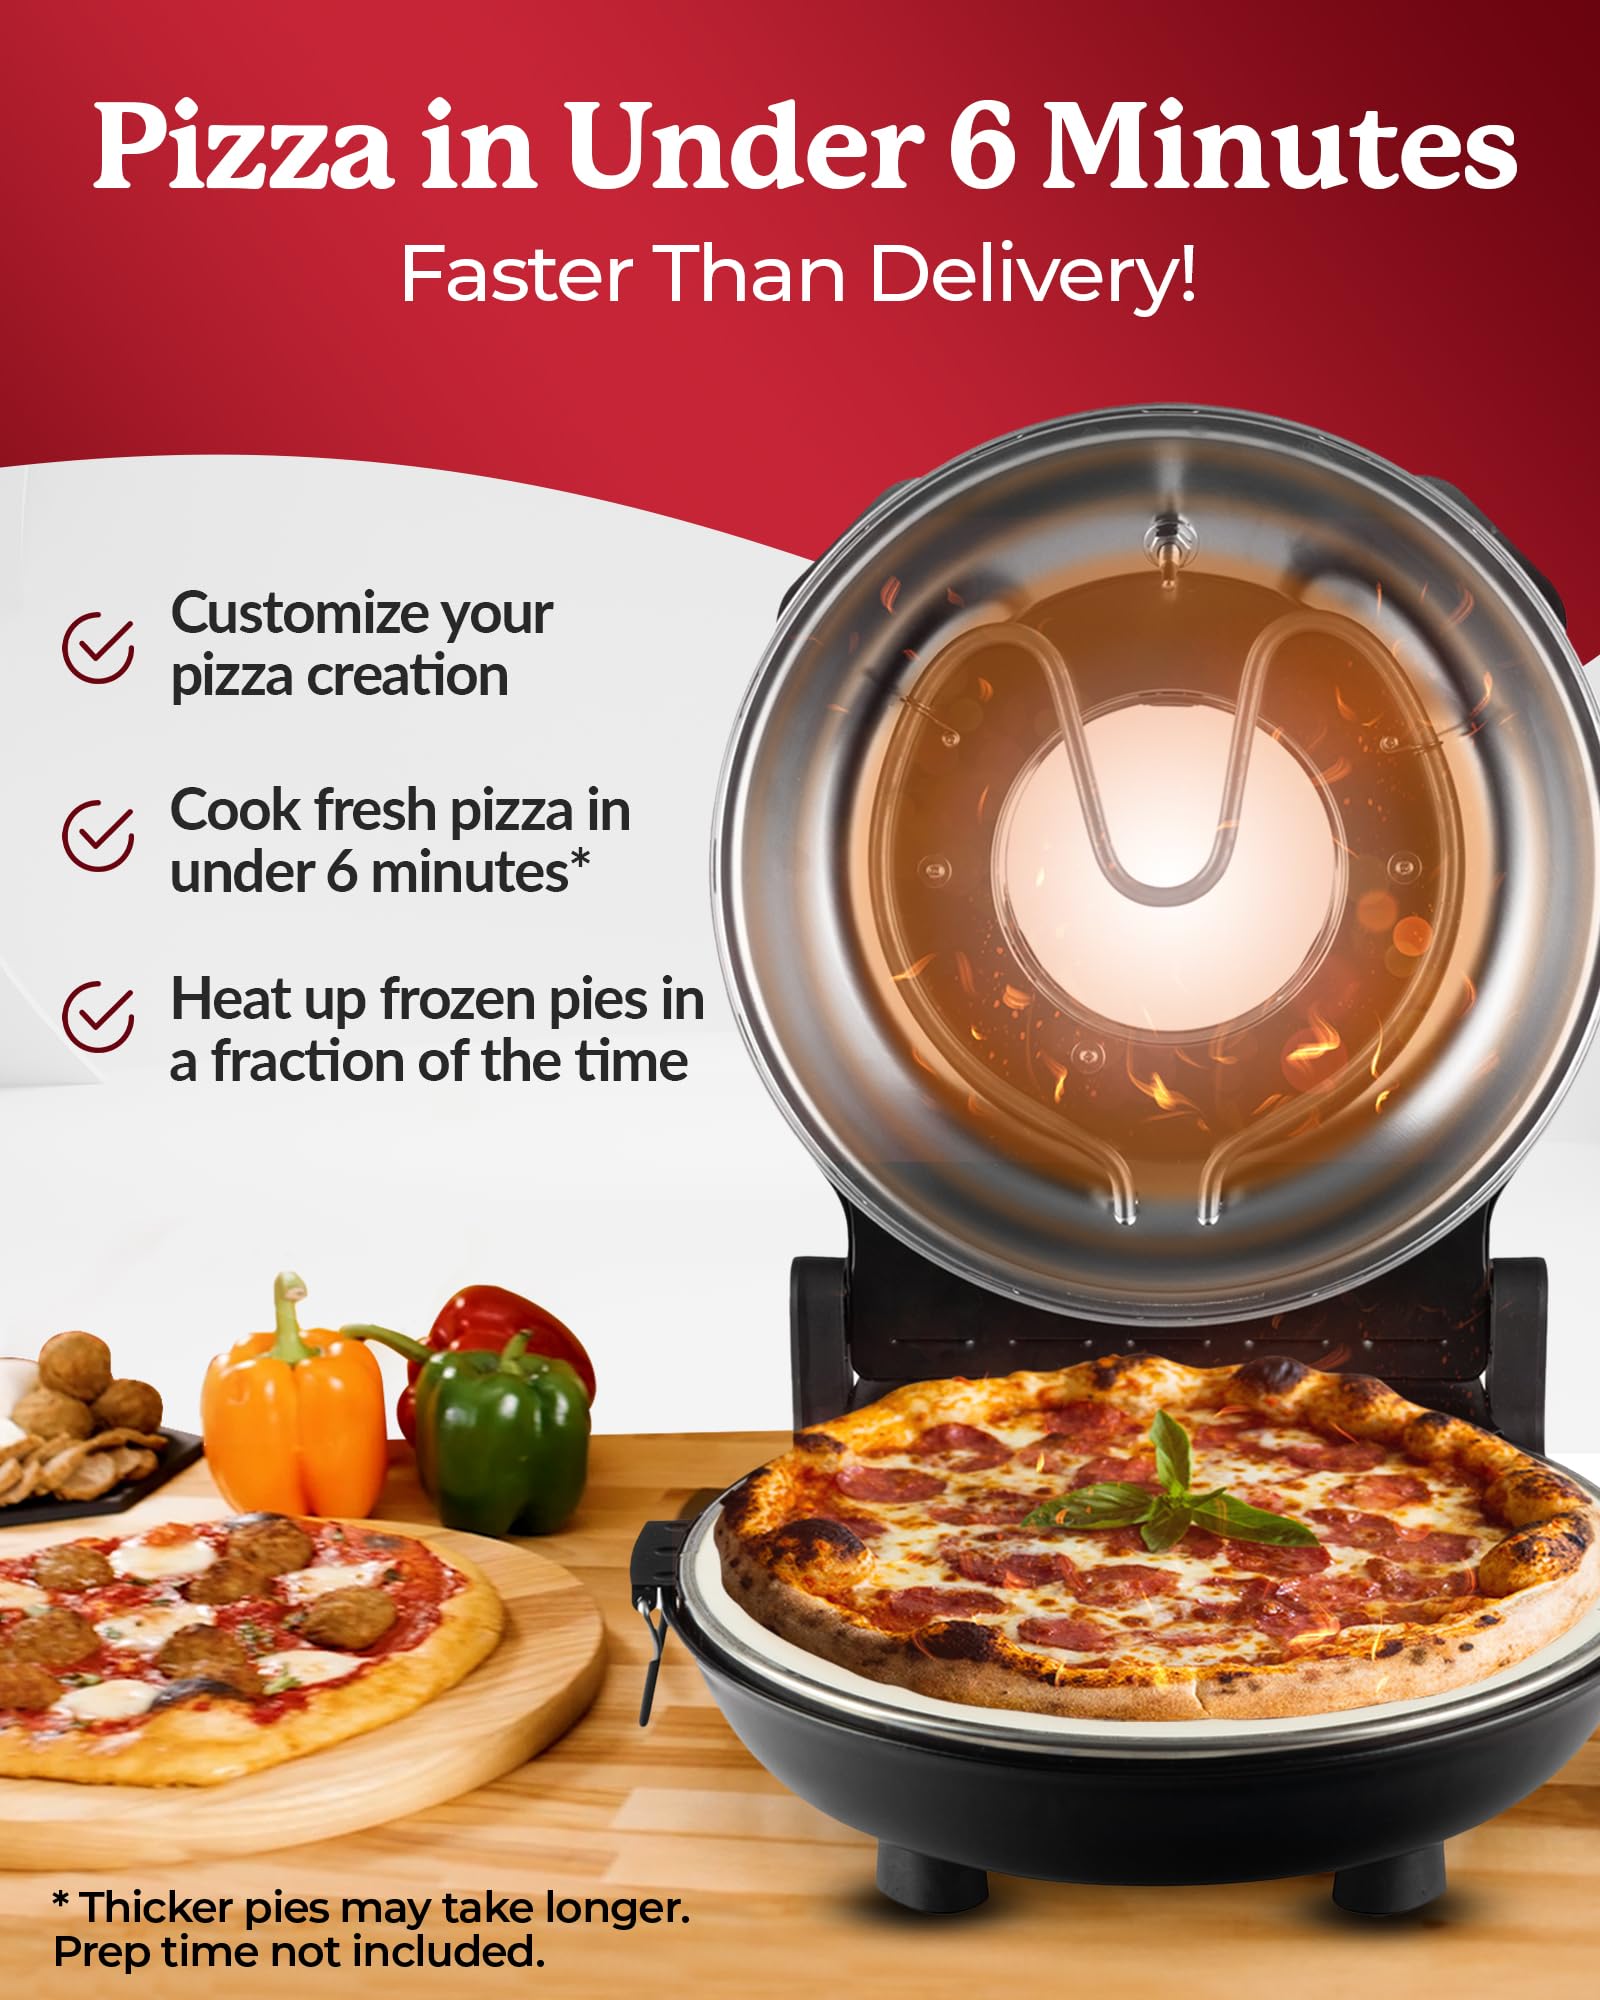 PIEZANO Pizza Oven by Granitestone – All in 1 Pizza Oven Indoor/Outdoor Portable Electric Countertop Pizza Maker Heats up to 800˚F with Pizza Stone to Simulate Brick Oven Taste at Home AS SEEN ON TV